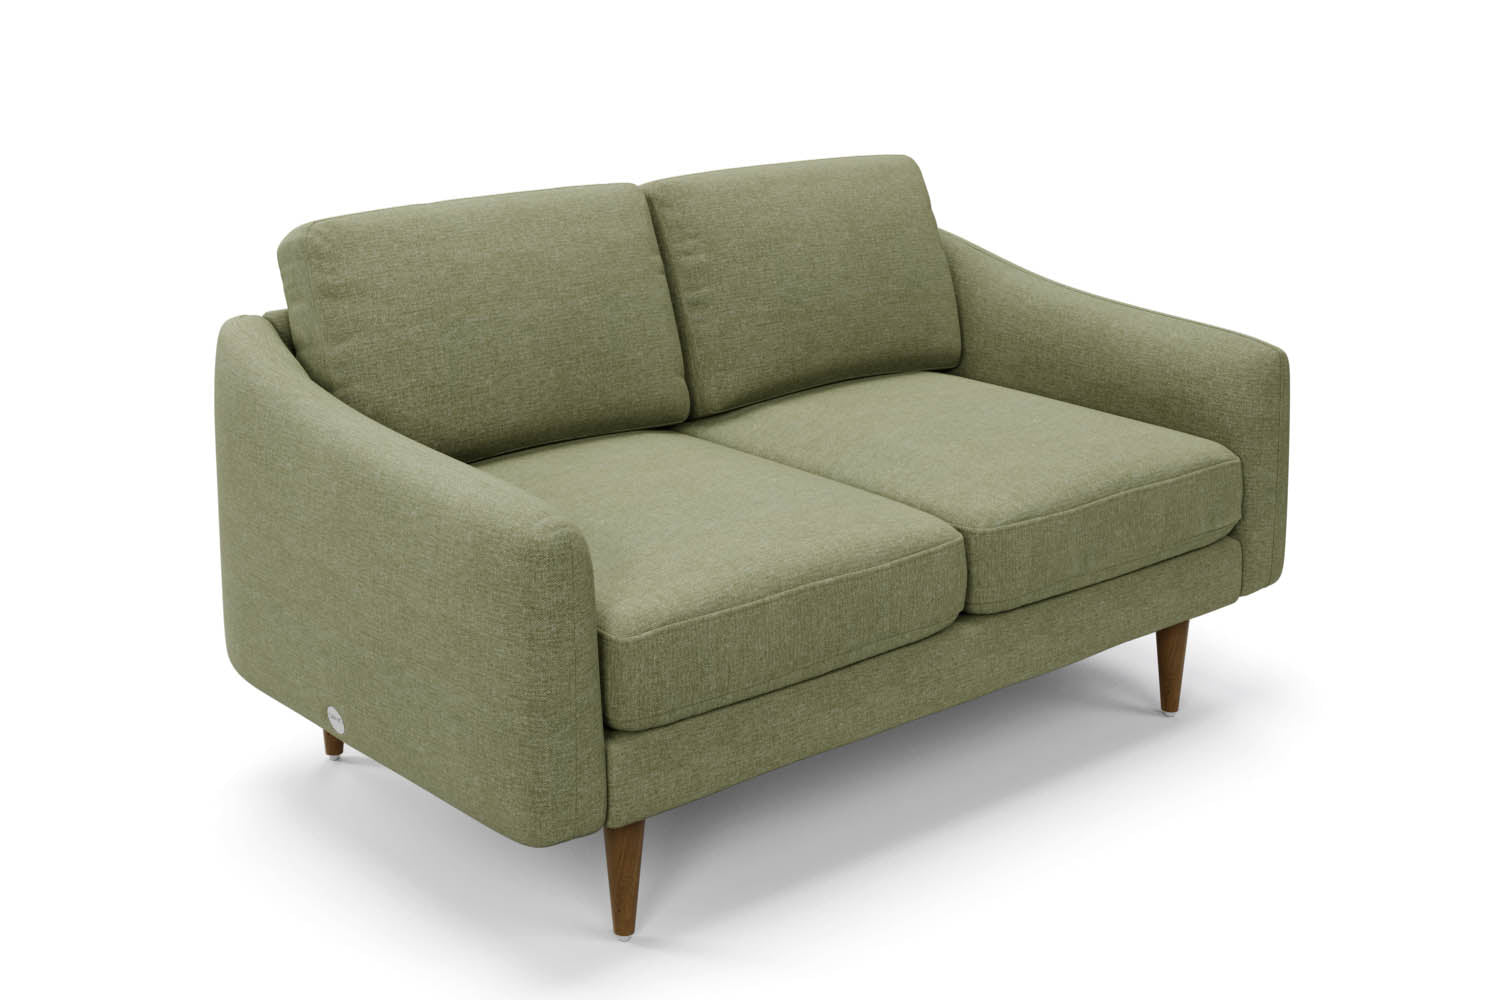 The Rebel 2 Seater Sofa in Sage with brown legs